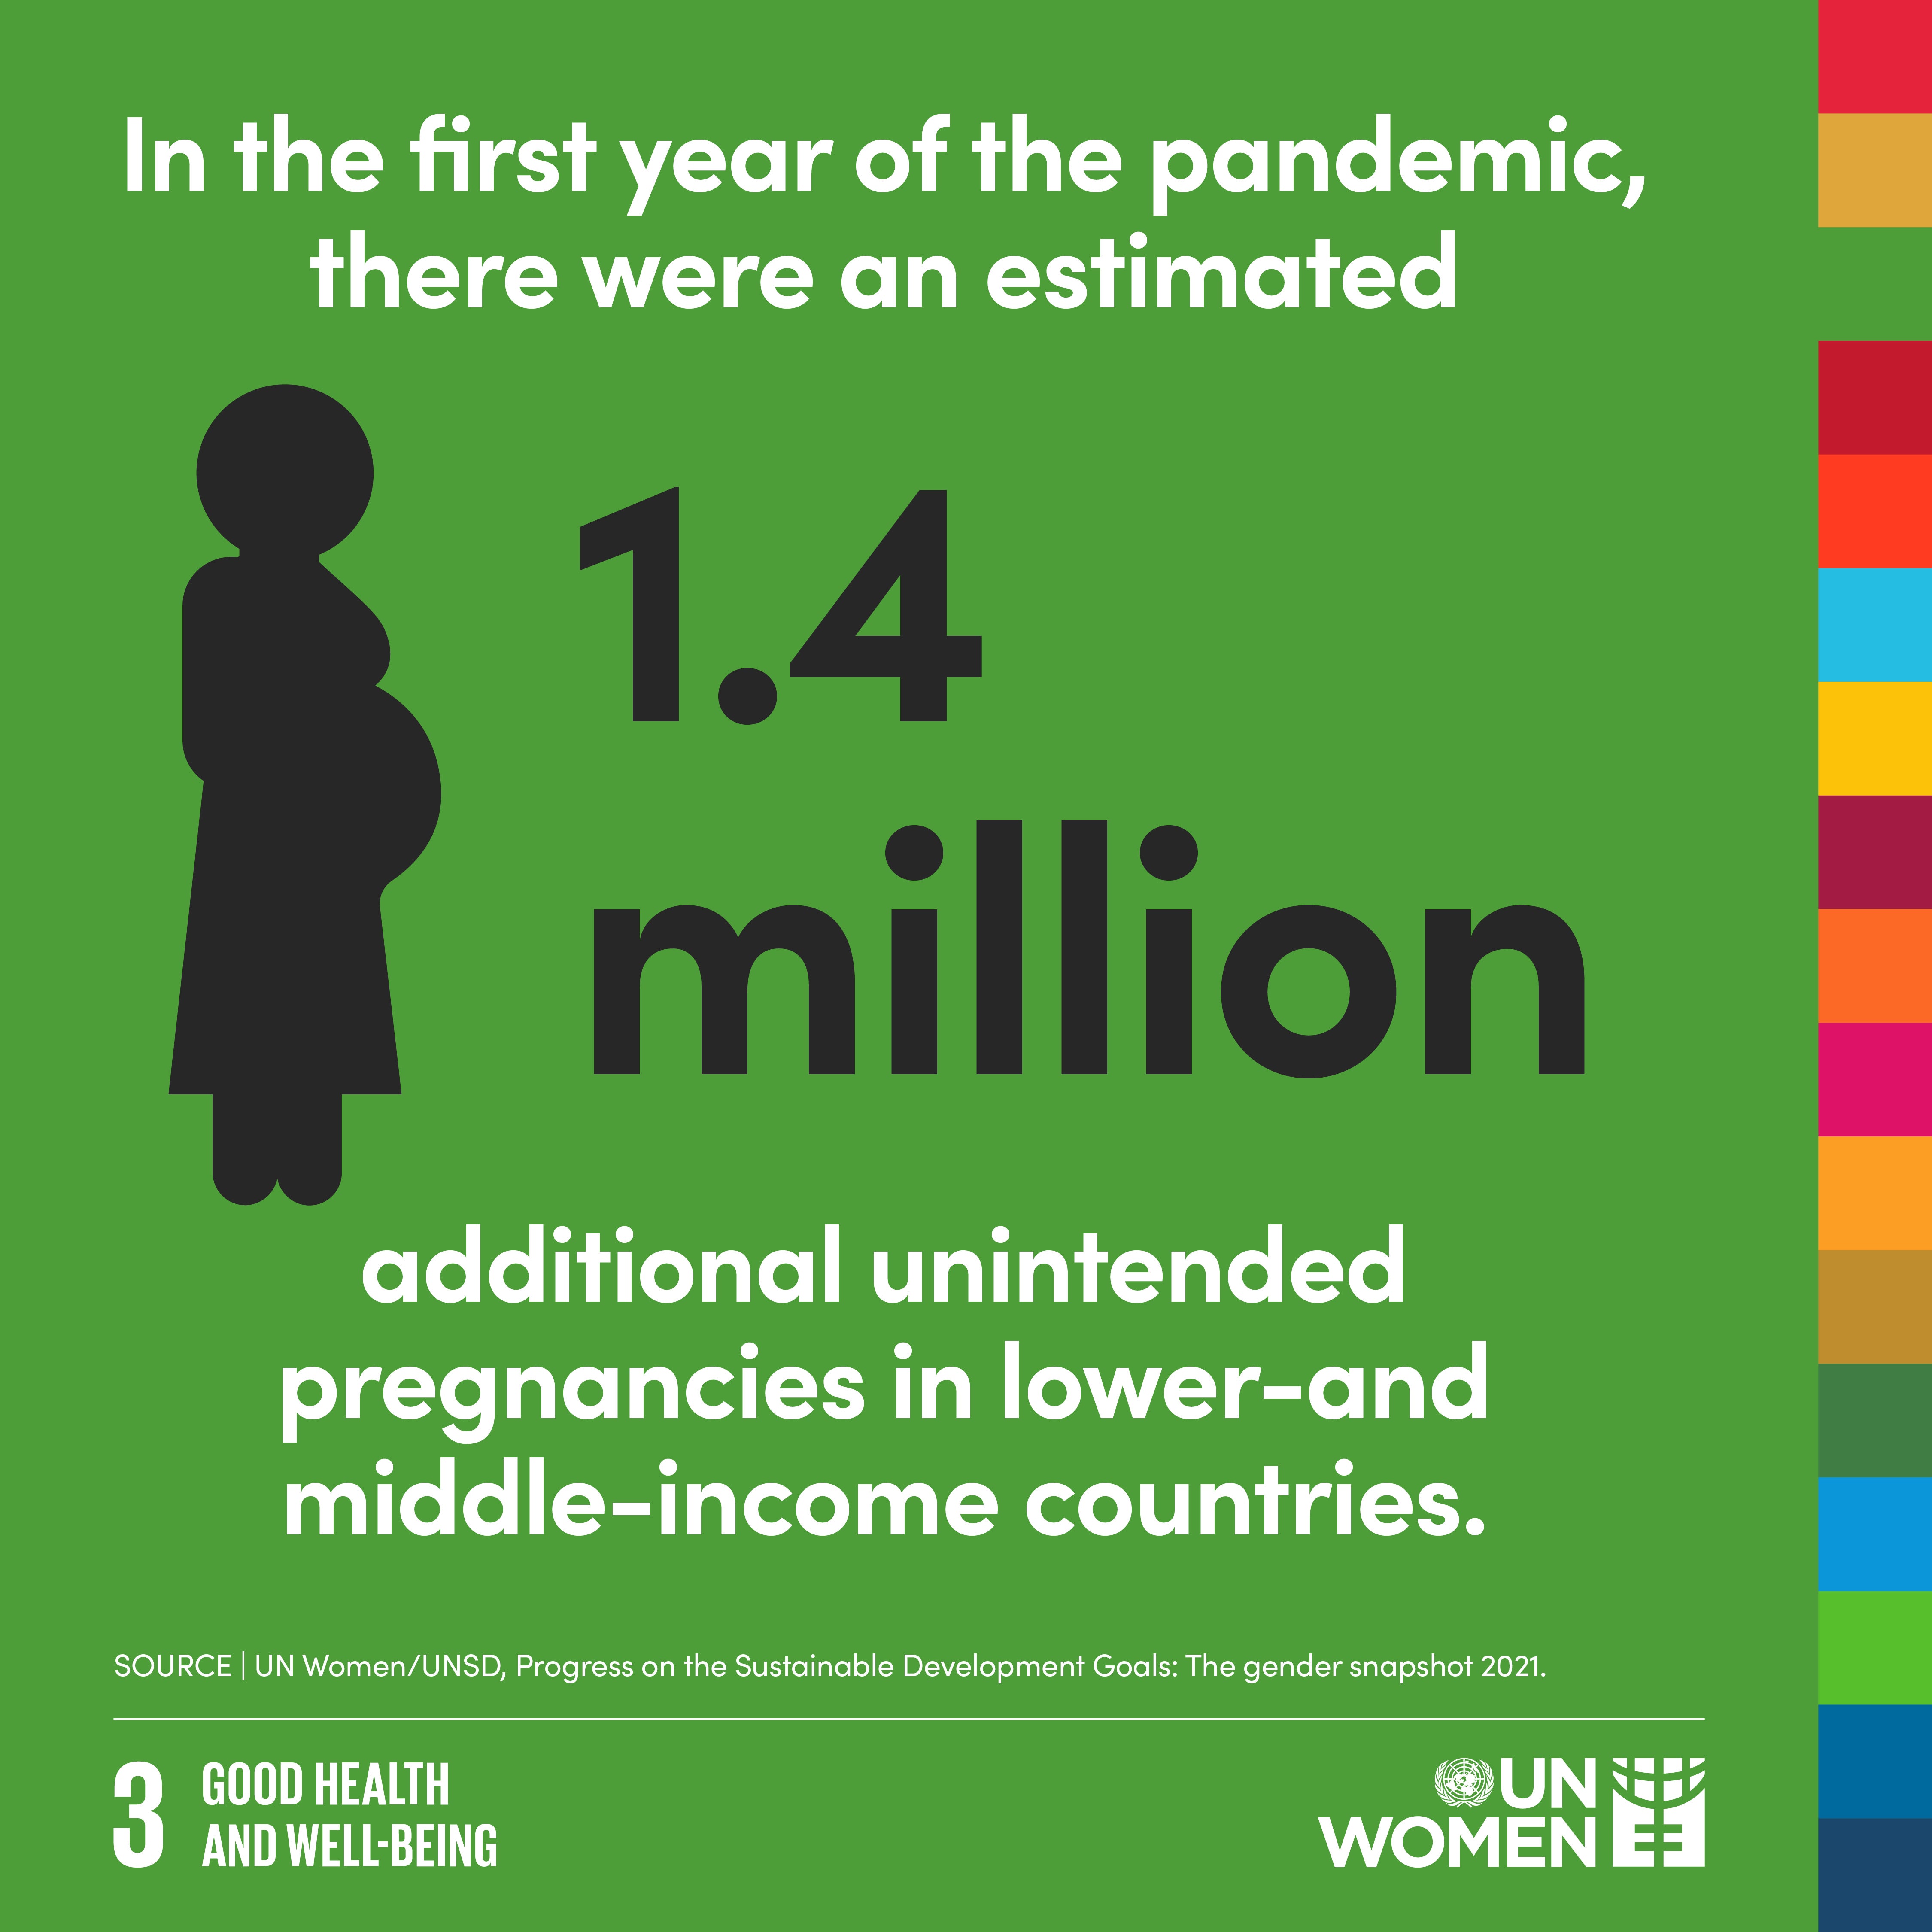 In the first year of the pandemic, there were an estimated additional 1.4 million additional unintended pregnancies in lower- and middle-income countries. 